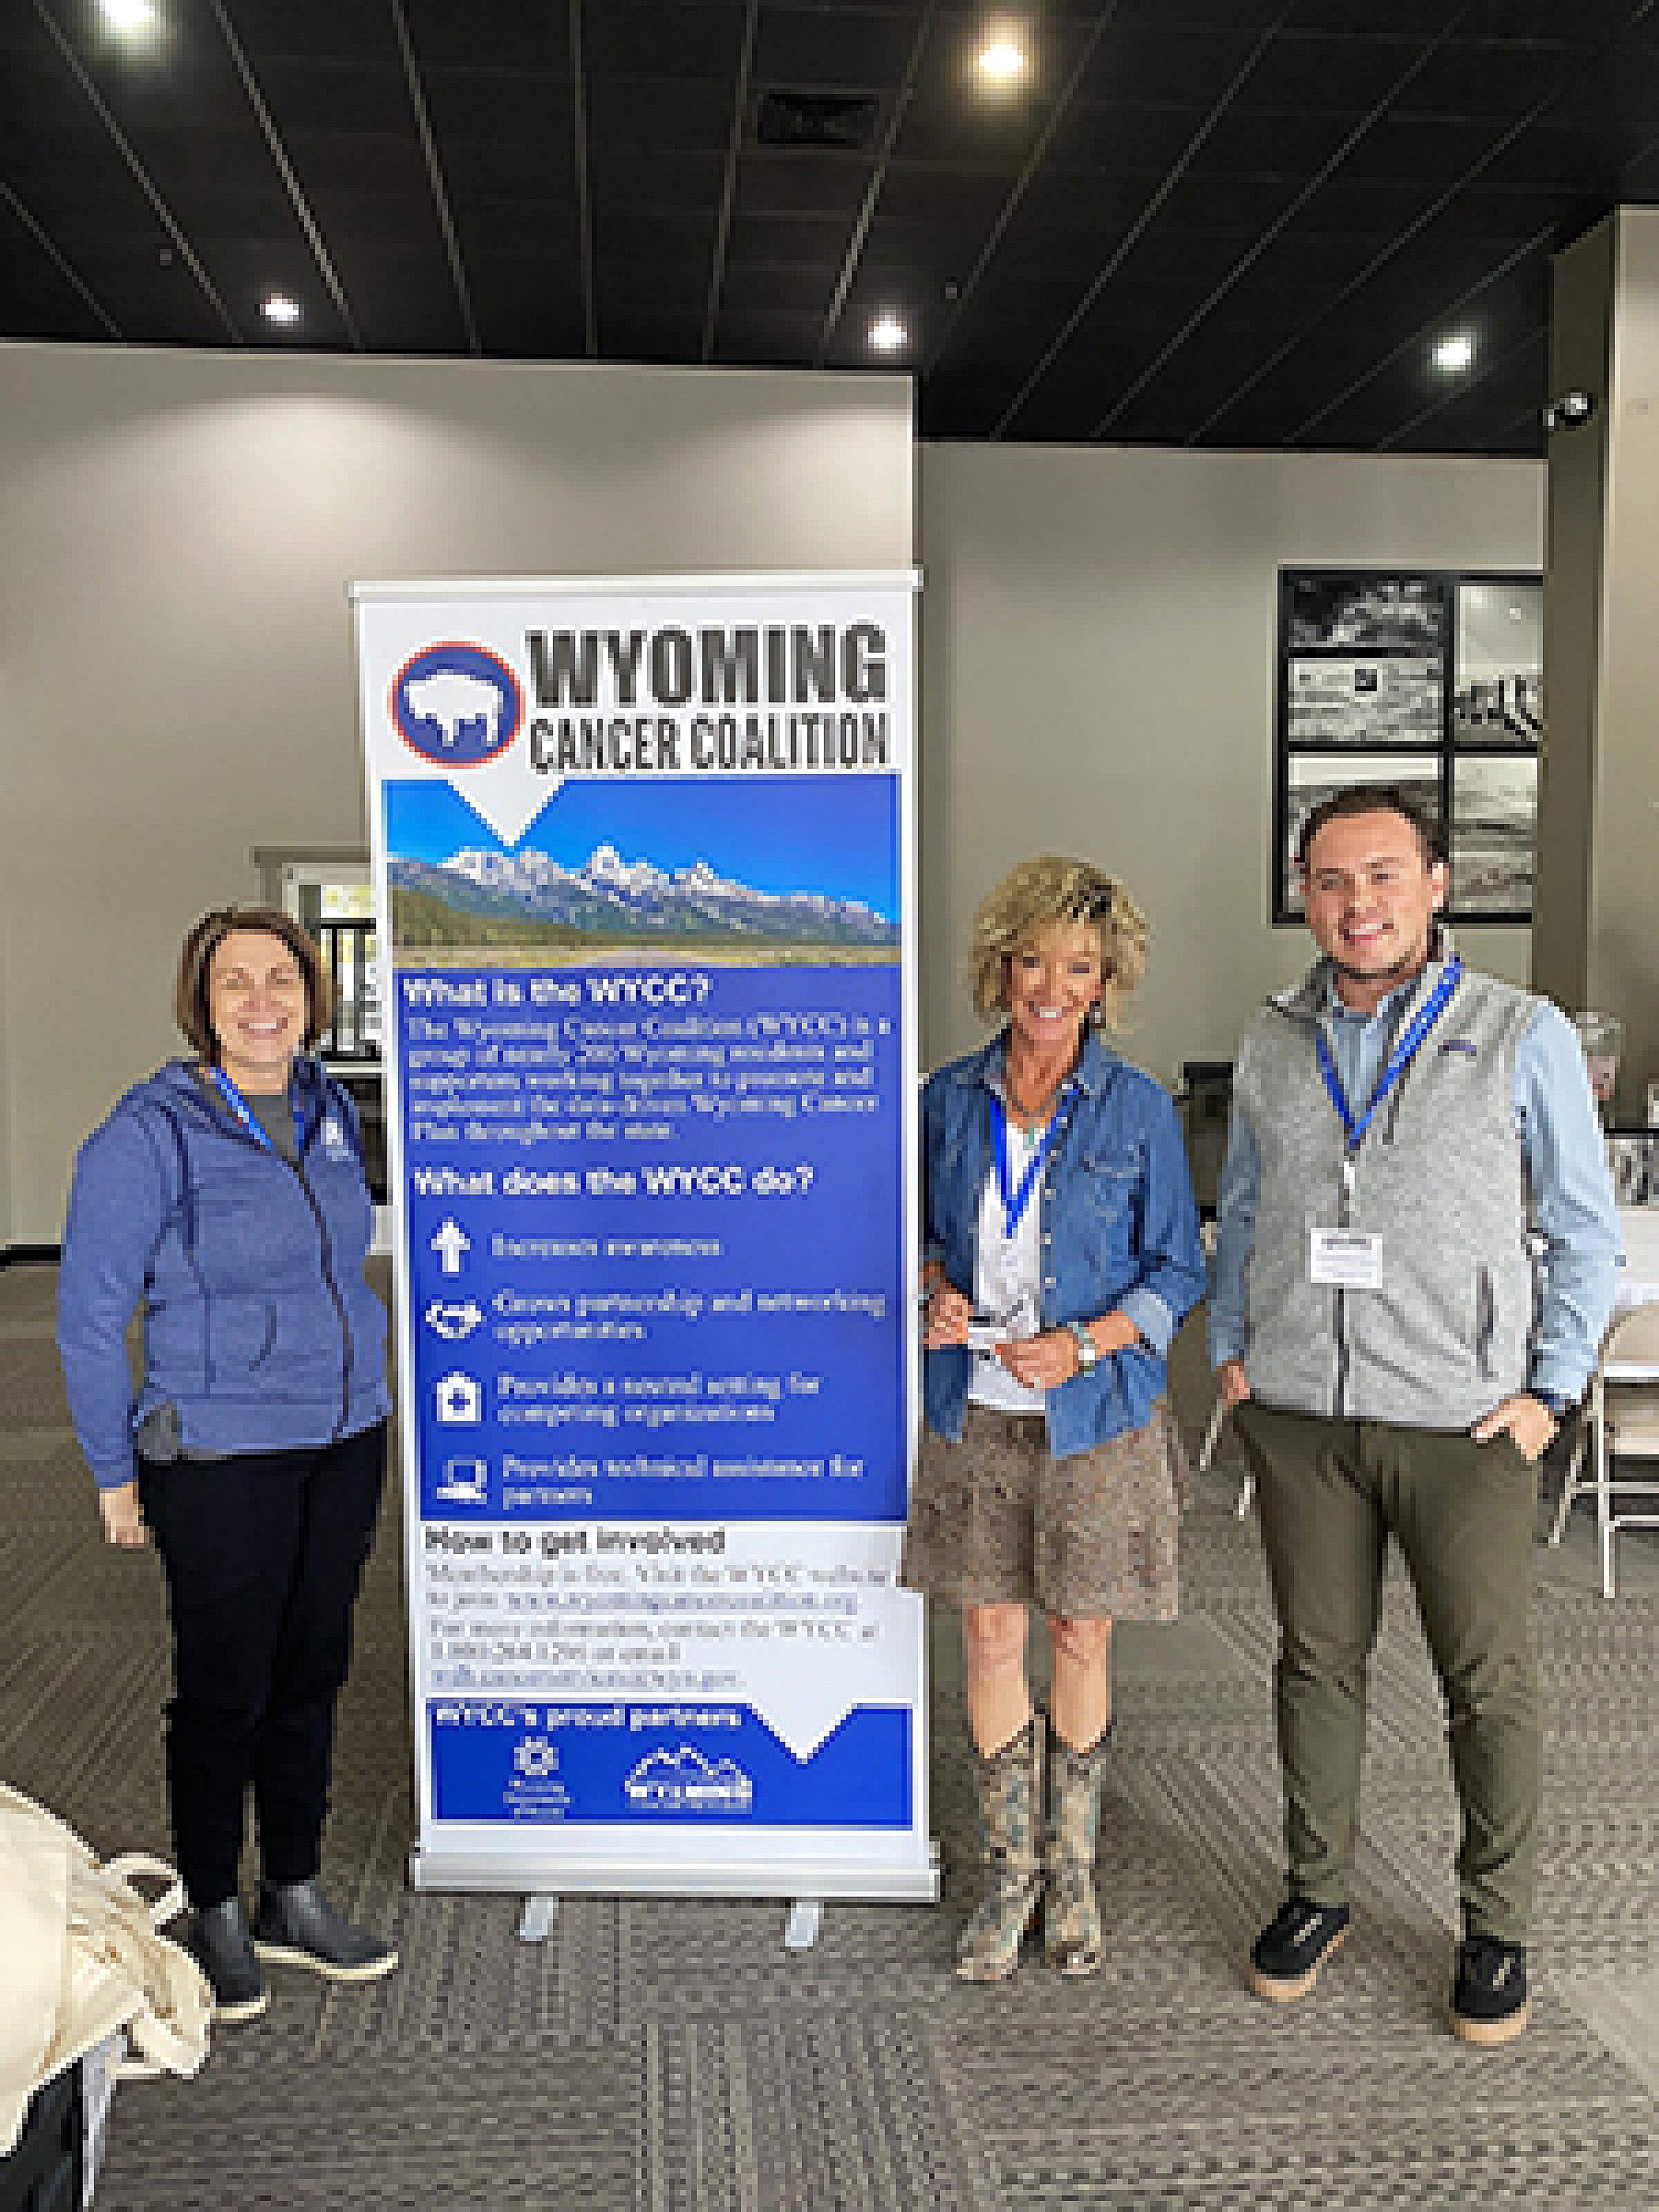 Melissa Yack Hall, PhD, Lisa Eades (co-chair of the Wyoming Cancer Coalition), and Nathaniel Ferre